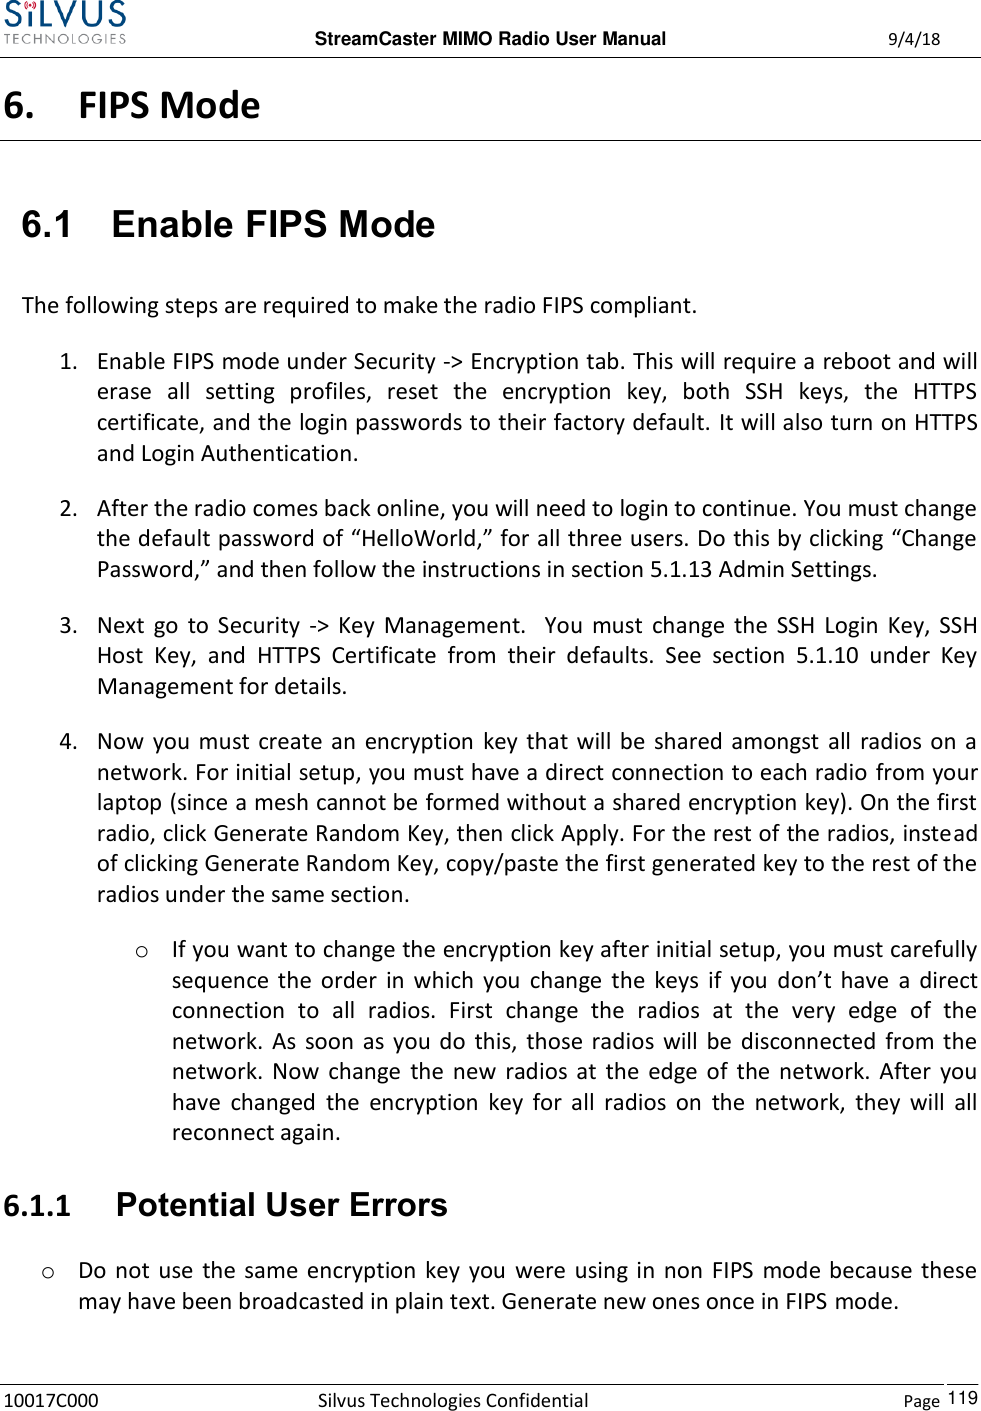  StreamCaster MIMO Radio User Manual  9/4/18 10017C000 Silvus Technologies Confidential    Page    119 6. FIPS Mode 6.1 Enable FIPS Mode The following steps are required to make the radio FIPS compliant.  1. Enable FIPS mode under Security -&gt; Encryption tab. This will require a reboot and will erase  all  setting  profiles,  reset  the  encryption  key,  both  SSH  keys,  the  HTTPS certificate, and the login passwords to their factory default. It will also turn on HTTPS and Login Authentication. 2. After the radio comes back online, you will need to login to continue. You must change the default password of “HelloWorld,” for all three users. Do this by clicking “Change Password,” and then follow the instructions in section 5.1.13 Admin Settings. 3. Next  go  to  Security  -&gt;  Key  Management.    You  must  change  the  SSH  Login  Key,  SSH Host  Key,  and  HTTPS  Certificate  from  their  defaults.  See  section  5.1.10  under  Key Management for details.  4. Now  you  must create an  encryption  key that  will be shared amongst all radios on  a network. For initial setup, you must have a direct connection to each radio from your laptop (since a mesh cannot be formed without a shared encryption key). On the first radio, click Generate Random Key, then click Apply. For the rest of the radios, instead of clicking Generate Random Key, copy/paste the first generated key to the rest of the radios under the same section. o If you want to change the encryption key after initial setup, you must carefully sequence  the  order  in  which  you  change  the  keys  if  you  don’t  have  a  direct connection  to  all  radios.  First  change  the  radios  at  the  very  edge  of  the network.  As  soon  as  you  do  this, those radios will  be  disconnected  from the network.  Now  change  the  new  radios  at  the  edge  of  the  network.  After  you have  changed  the  encryption  key  for  all  radios  on  the  network,  they  will  all reconnect again. 6.1.1 Potential User Errors o Do not  use  the  same  encryption  key  you  were using  in  non FIPS  mode because  these may have been broadcasted in plain text. Generate new ones once in FIPS mode.  